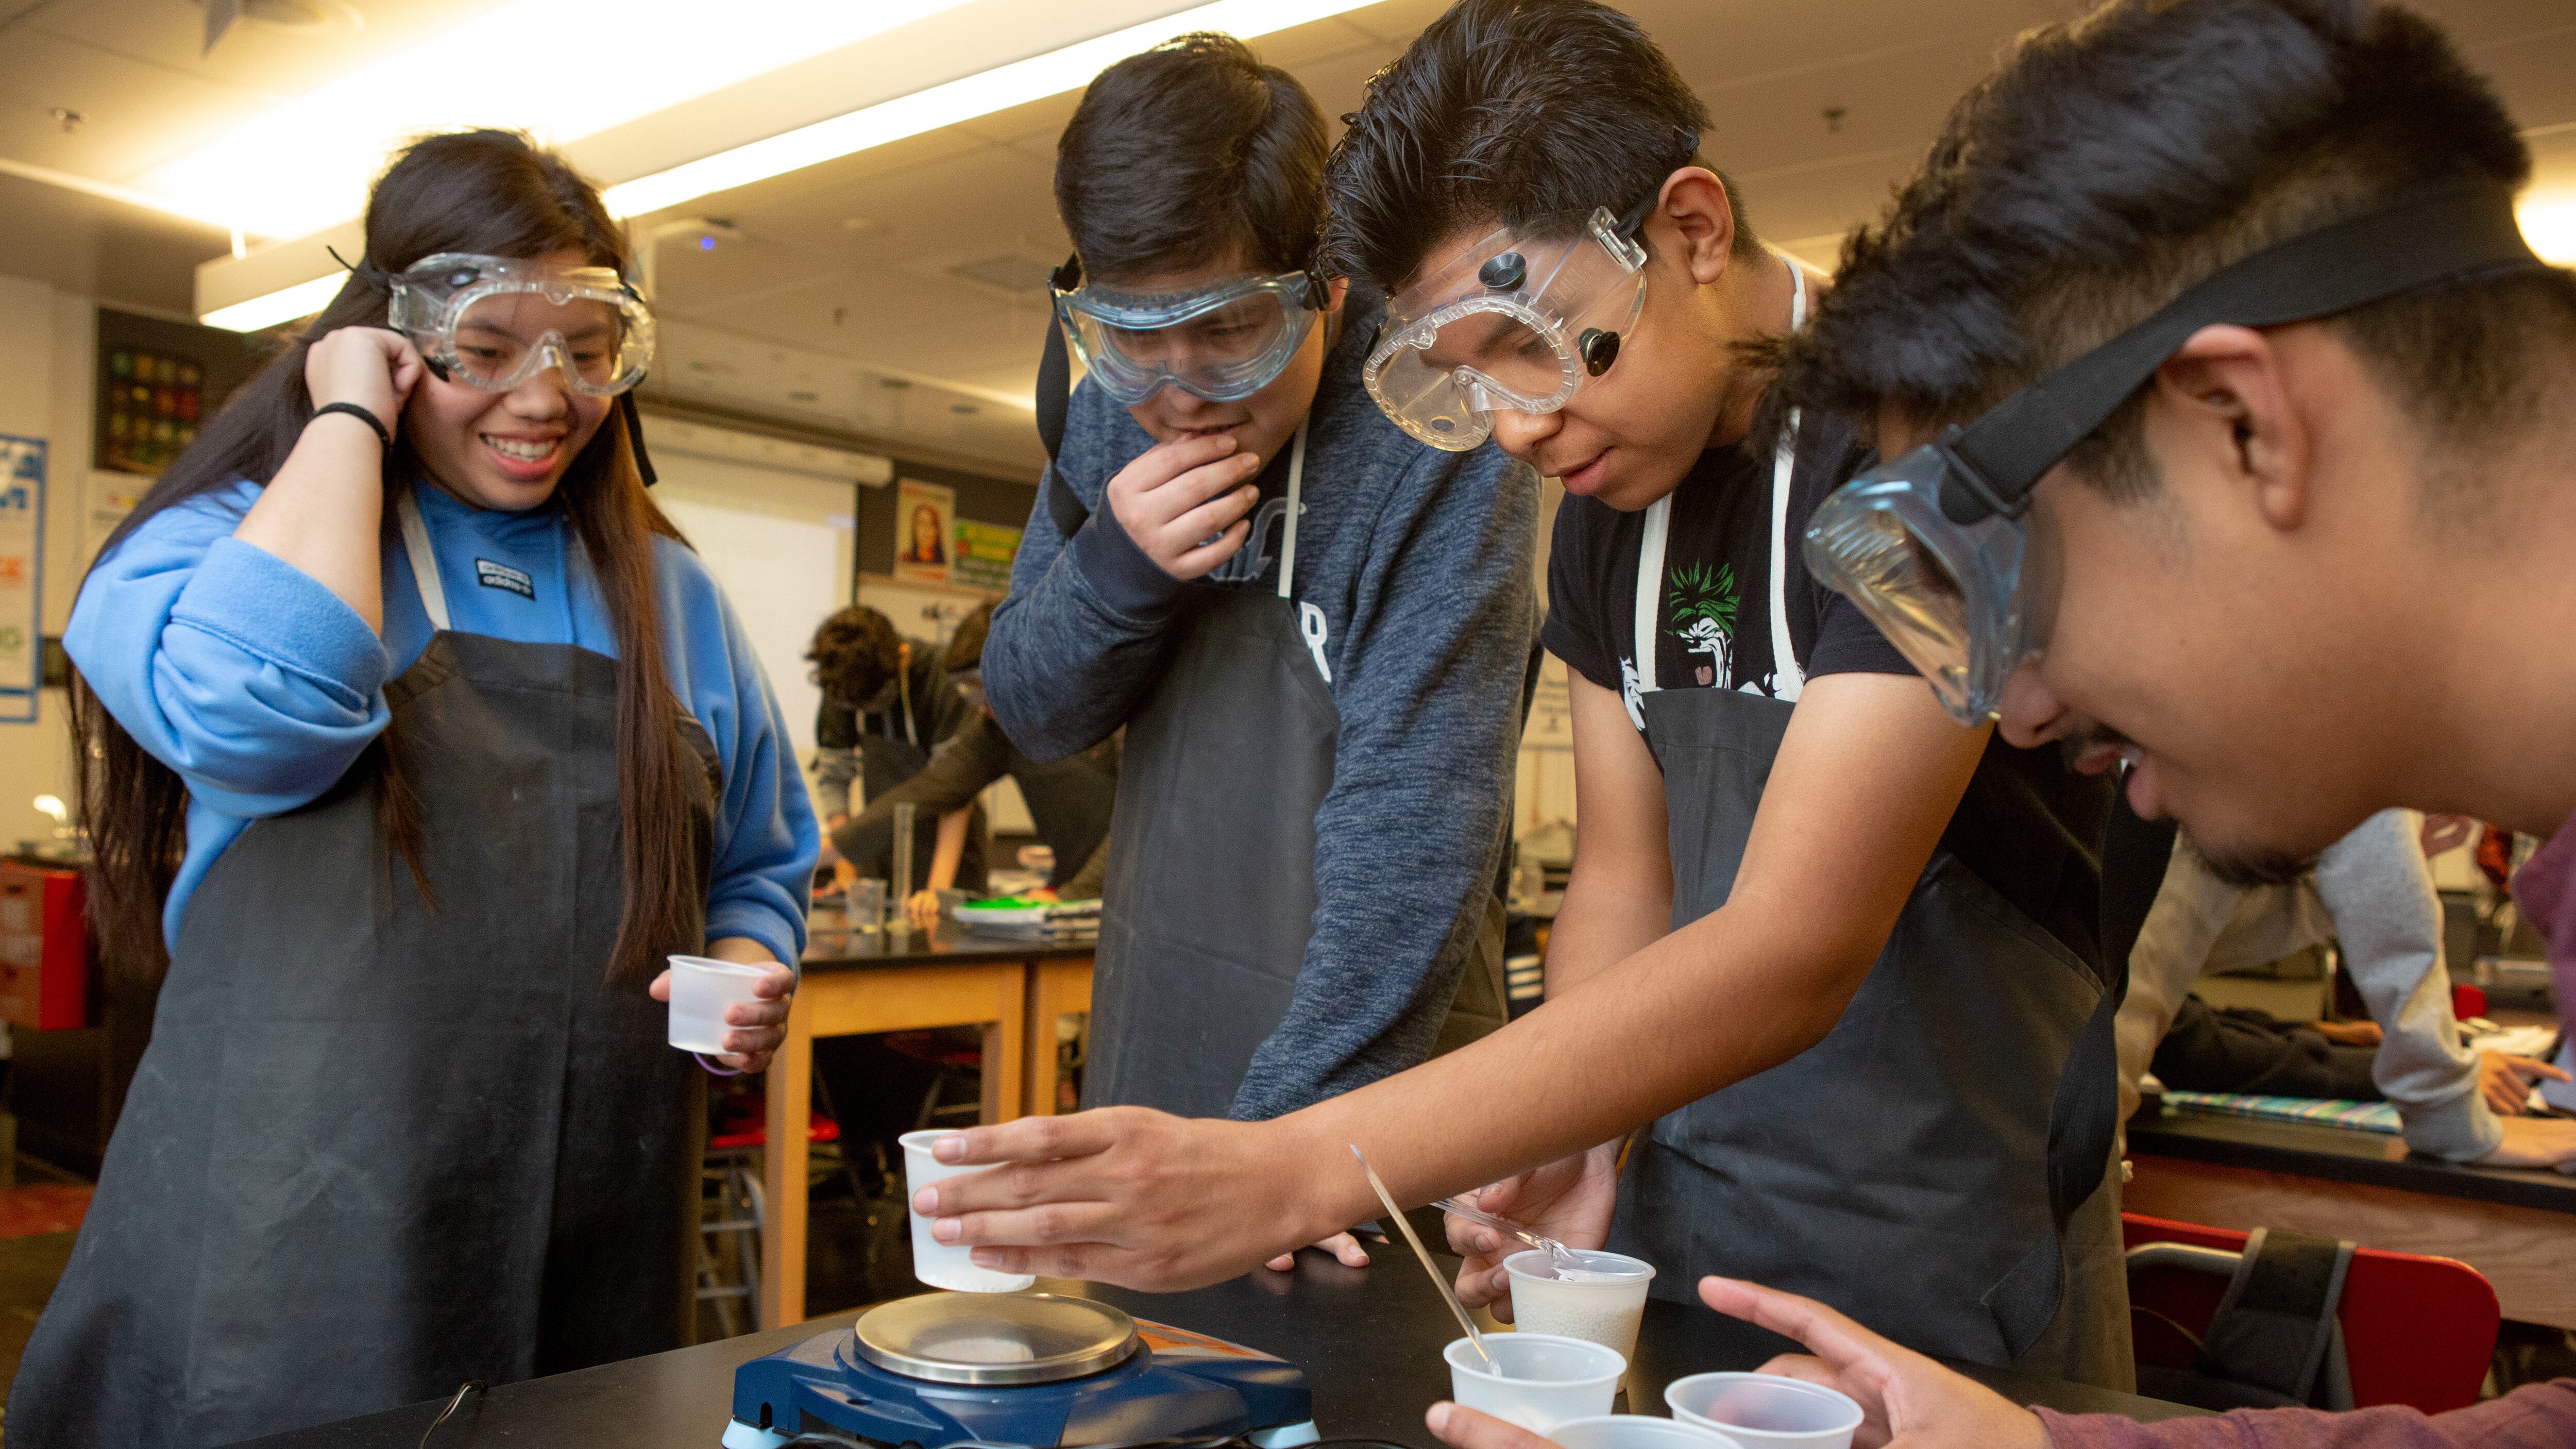 Four high school students wearing protective lab equipment work together on an experiment.